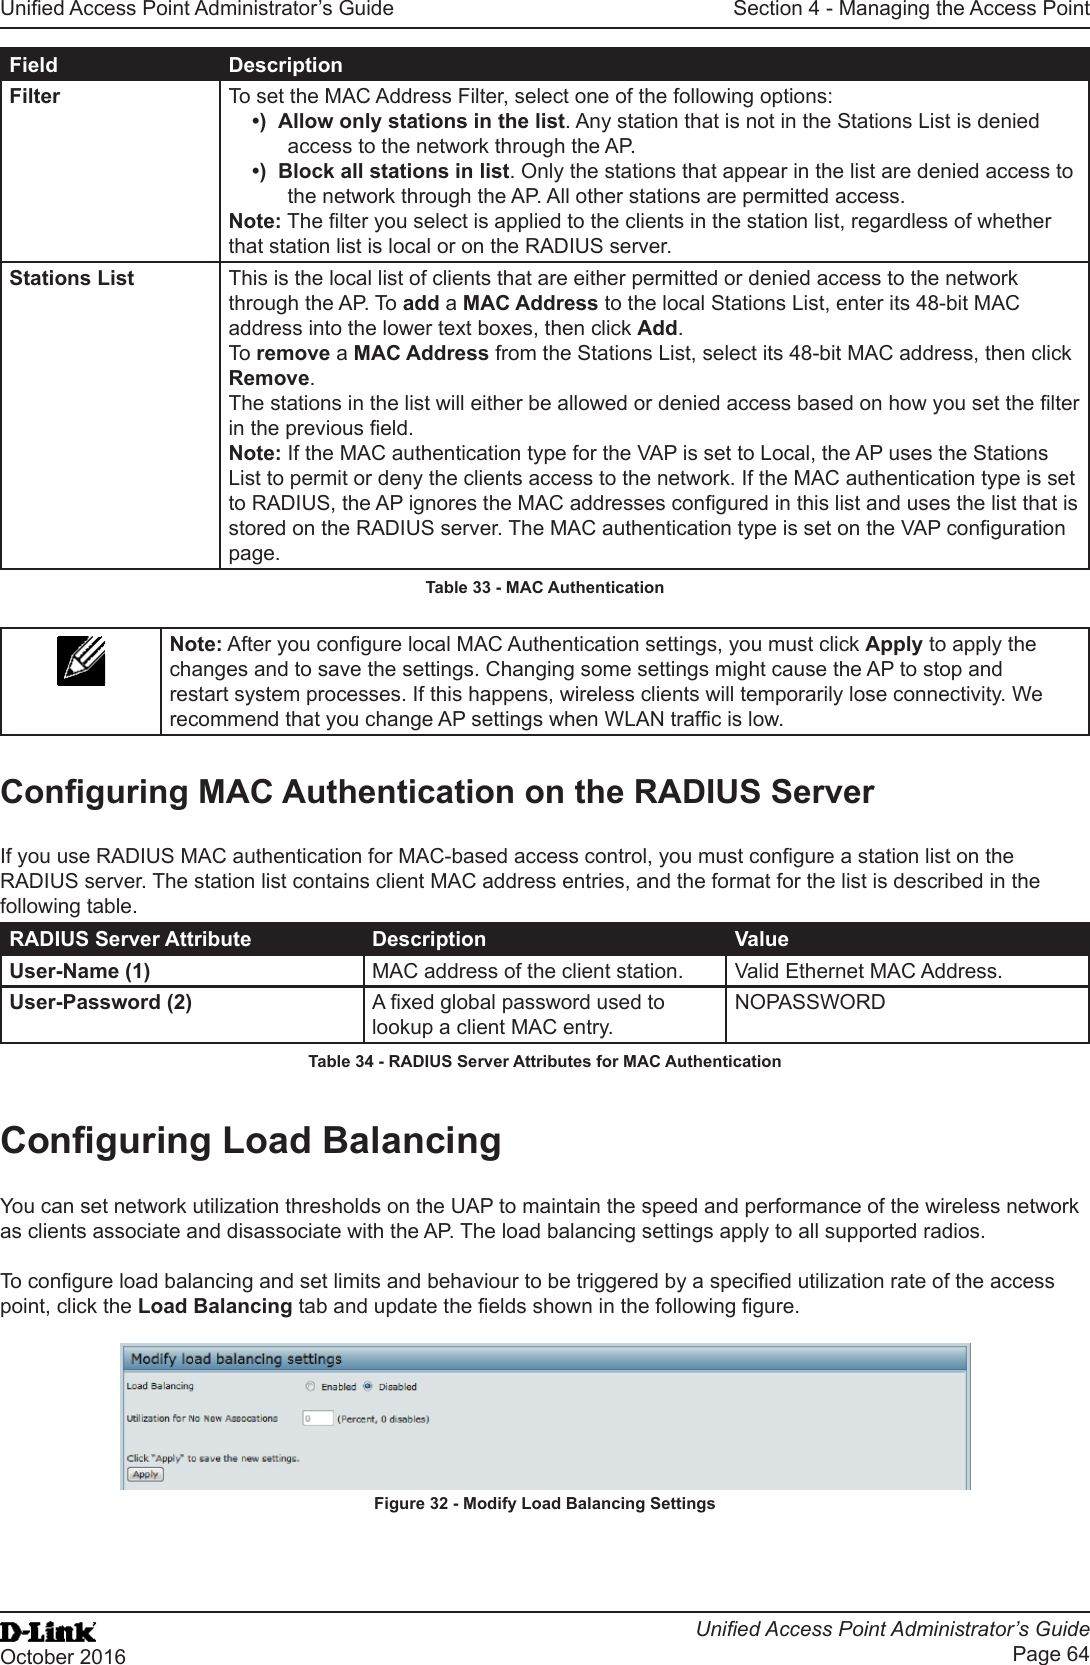 Unied Access Point Administrator’s GuideUnied Access Point Administrator’s GuidePage 64October 2016Section 4 - Managing the Access PointField DescriptionFilter To set the MAC Address Filter, select one of the following options:•)  Allow only stations in the list. Any station that is not in the Stations List is denied access to the network through the AP.•)  Block all stations in list. Only the stations that appear in the list are denied access to the network through the AP. All other stations are permitted access.Note: The lter you select is applied to the clients in the station list, regardless of whether that station list is local or on the RADIUS server.Stations List This is the local list of clients that are either permitted or denied access to the network through the AP. To add a MAC Address to the local Stations List, enter its 48-bit MAC address into the lower text boxes, then click Add. To remove a MAC Address from the Stations List, select its 48-bit MAC address, then click Remove.The stations in the list will either be allowed or denied access based on how you set the lter in the previous eld.Note: If the MAC authentication type for the VAP is set to Local, the AP uses the Stations List to permit or deny the clients access to the network. If the MAC authentication type is set to RADIUS, the AP ignores the MAC addresses congured in this list and uses the list that is stored on the RADIUS server. The MAC authentication type is set on the VAP conguration page.Table 33 - MAC AuthenticationNote: After you congure local MAC Authentication settings, you must click Apply to apply the changes and to save the settings. Changing some settings might cause the AP to stop and restart system processes. If this happens, wireless clients will temporarily lose connectivity. We recommend that you change AP settings when WLAN trafc is low. Conguring MAC Authentication on the RADIUS ServerIf you use RADIUS MAC authentication for MAC-based access control, you must congure a station list on the RADIUS server. The station list contains client MAC address entries, and the format for the list is described in the following table.RADIUS Server Attribute Description ValueUser-Name (1) MAC address of the client station. Valid Ethernet MAC Address.User-Password (2) A xed global password used to lookup a client MAC entry.NOPASSWORDTable 34 - RADIUS Server Attributes for MAC AuthenticationConguring Load BalancingYou can set network utilization thresholds on the UAP to maintain the speed and performance of the wireless network as clients associate and disassociate with the AP. The load balancing settings apply to all supported radios. To congure load balancing and set limits and behaviour to be triggered by a specied utilization rate of the access point, click the Load Balancing tab and update the elds shown in the following gure.Figure 32 - Modify Load Balancing Settings